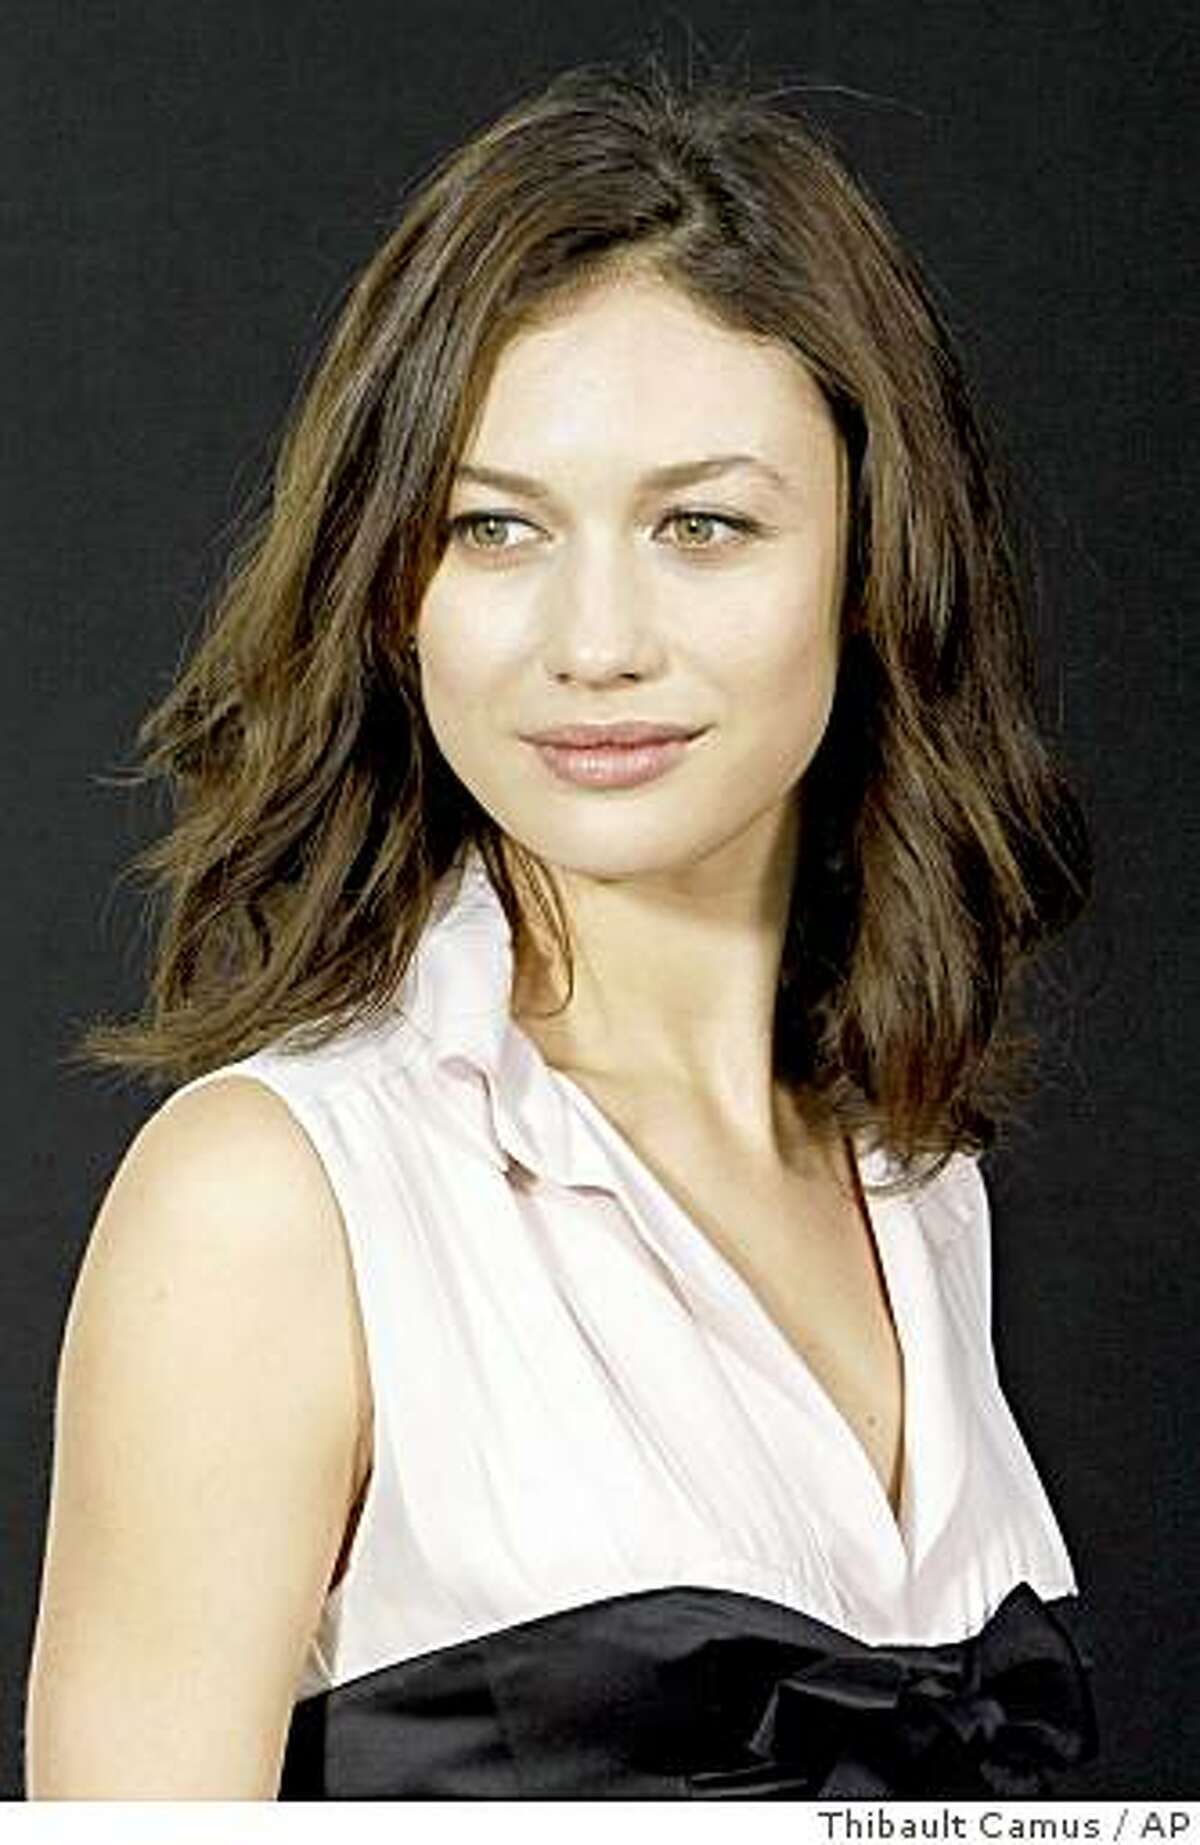 Ukrainian actress Olga Kurylenko is seen prior to the presentation of Chanel's Fall-Winter 2009-2010 ready-to-wear collection, Tuesday, March 10, 2009 in Paris.